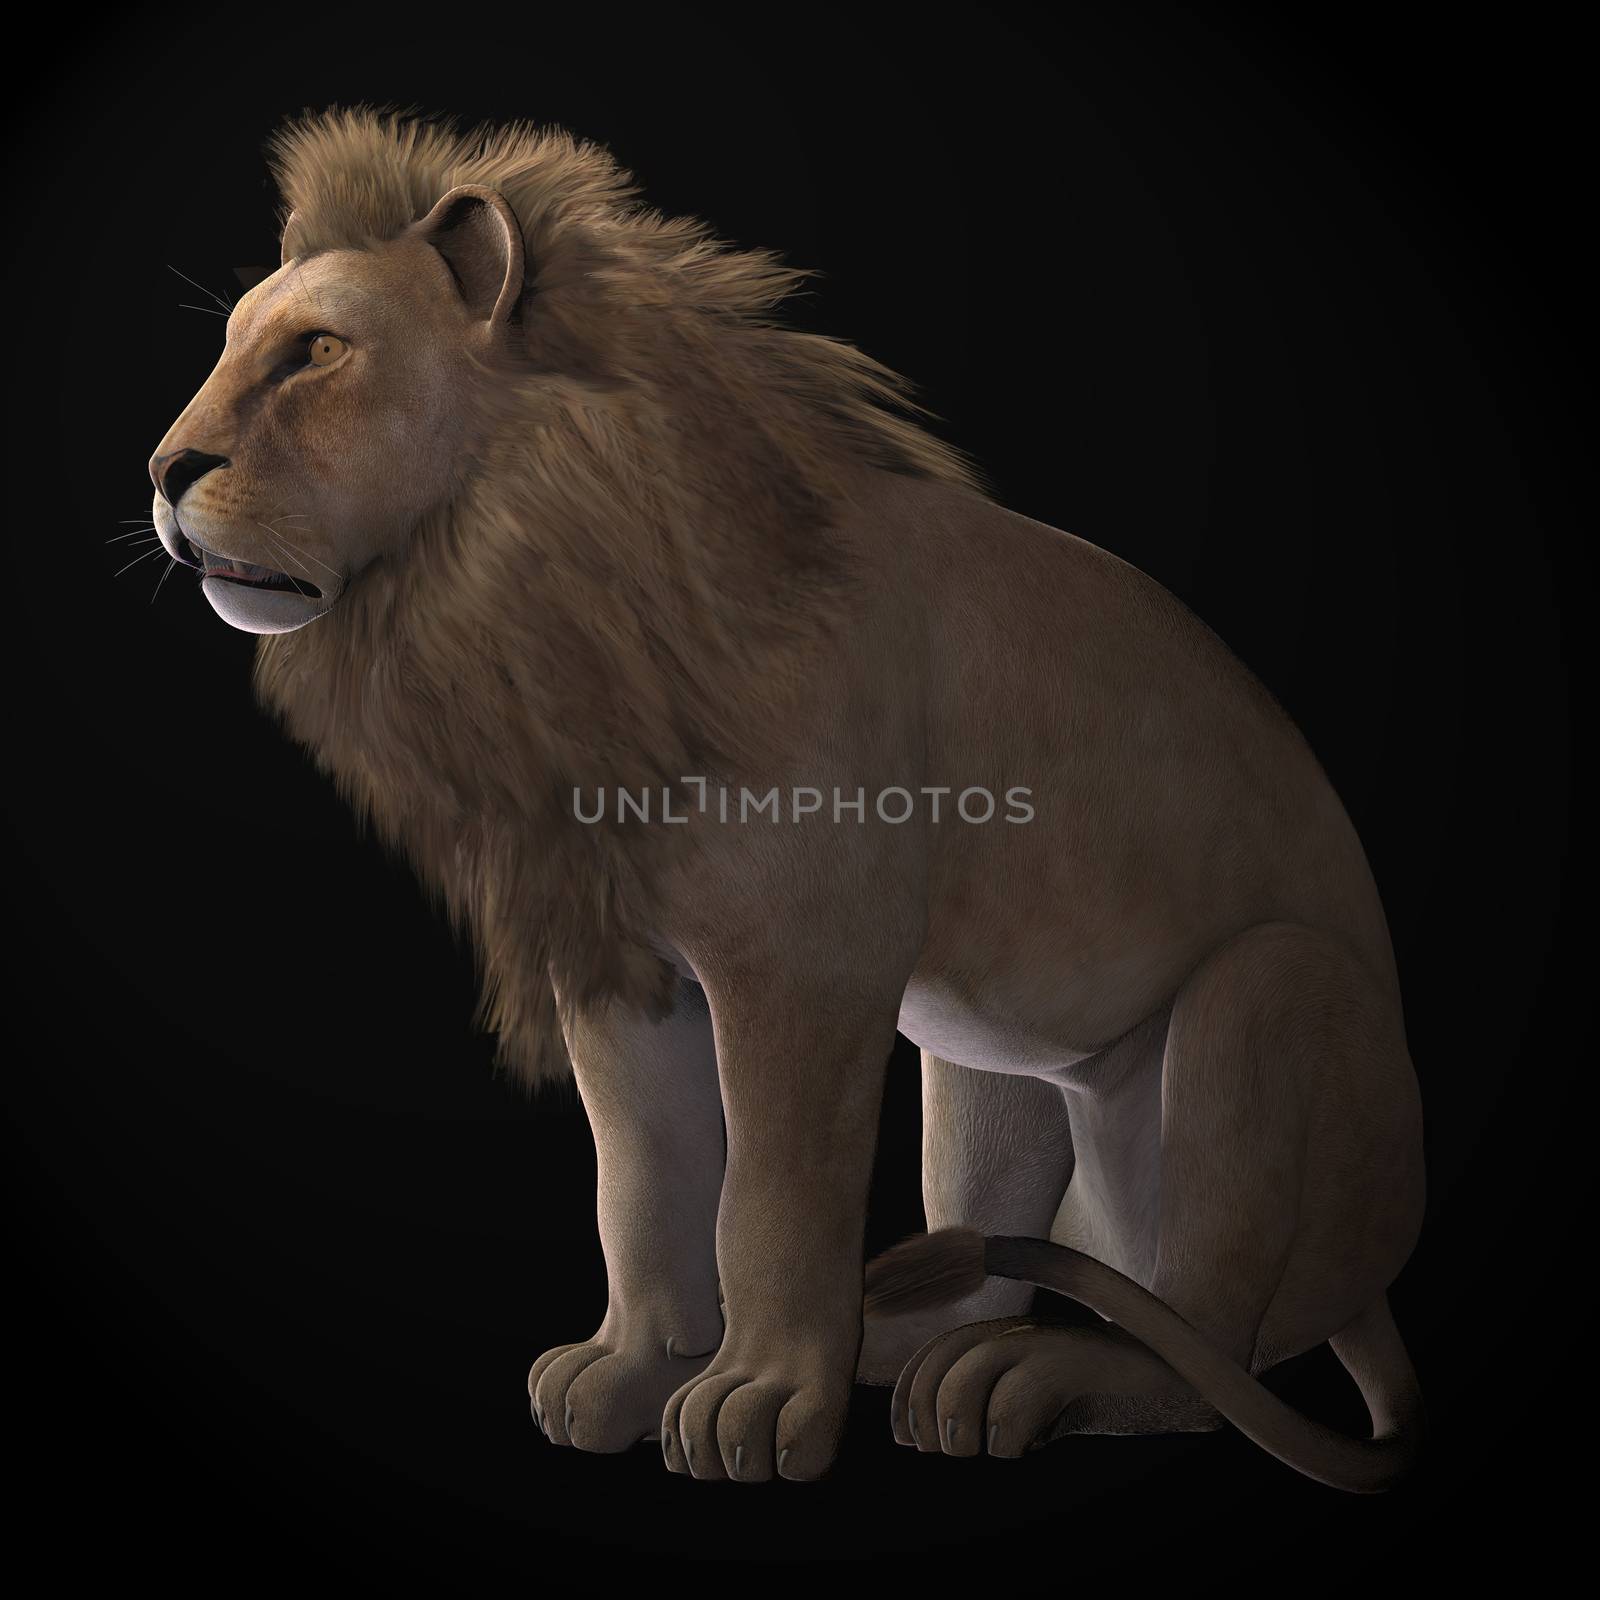 African Lion on Black by Catmando